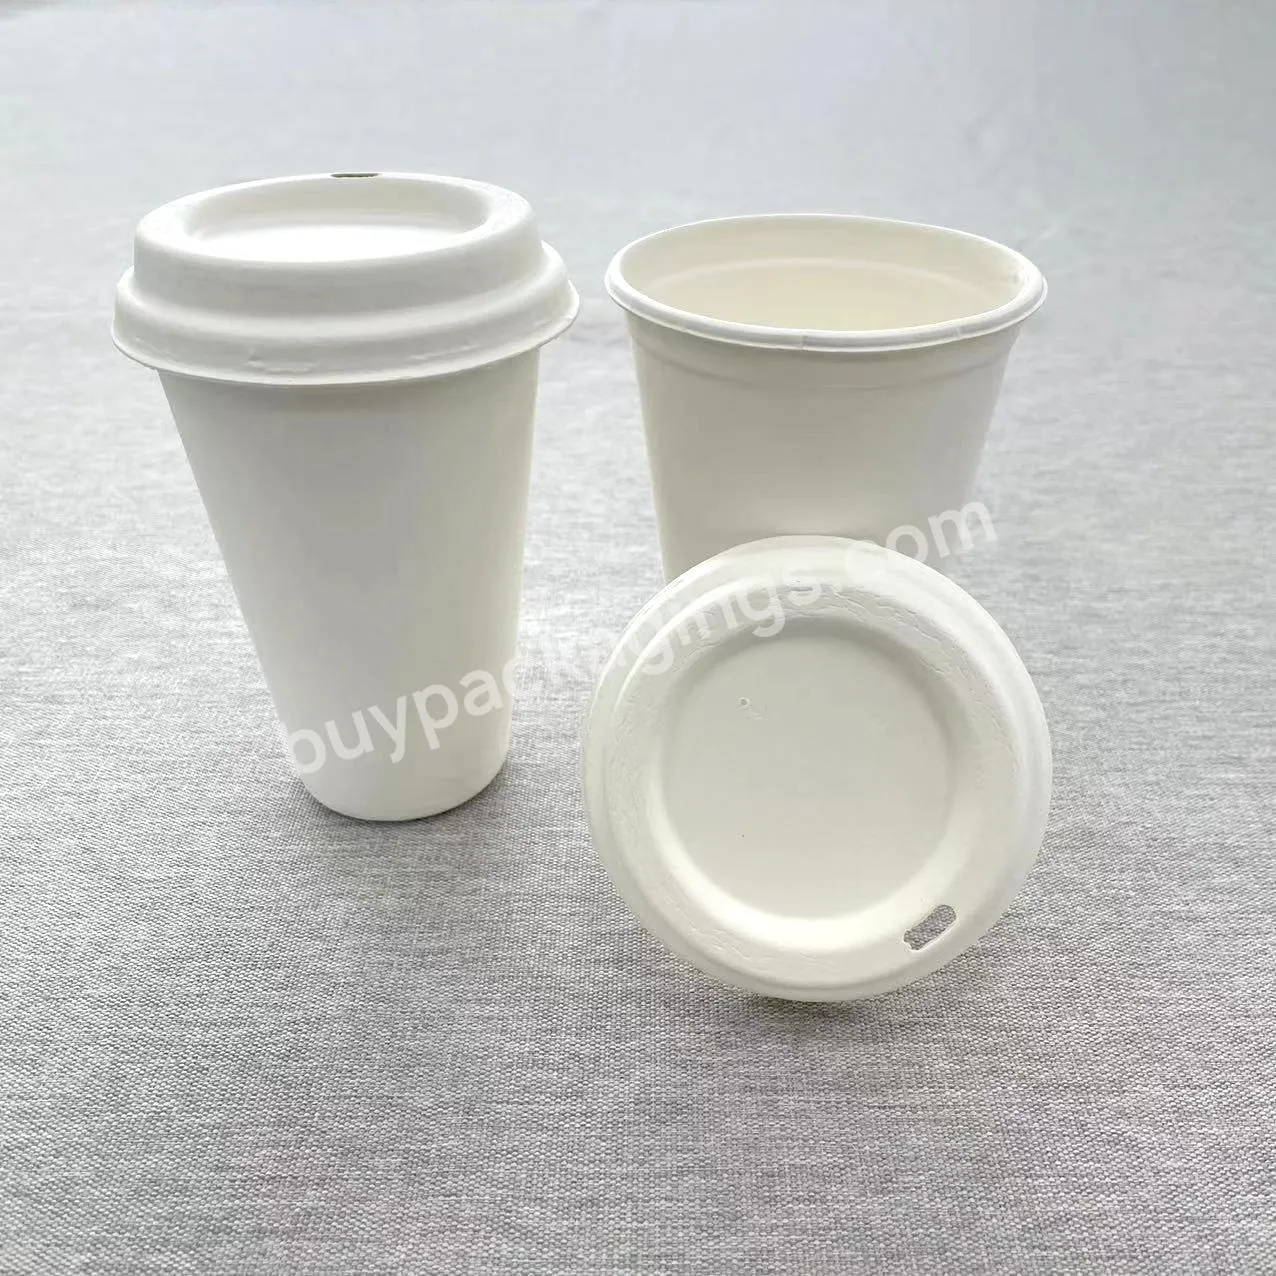 Bamboo Bagasse Fiber 100% Biodegradable Disposable Cafe Coffee Drinkware Paper Cup For Hot And Cold Drinks